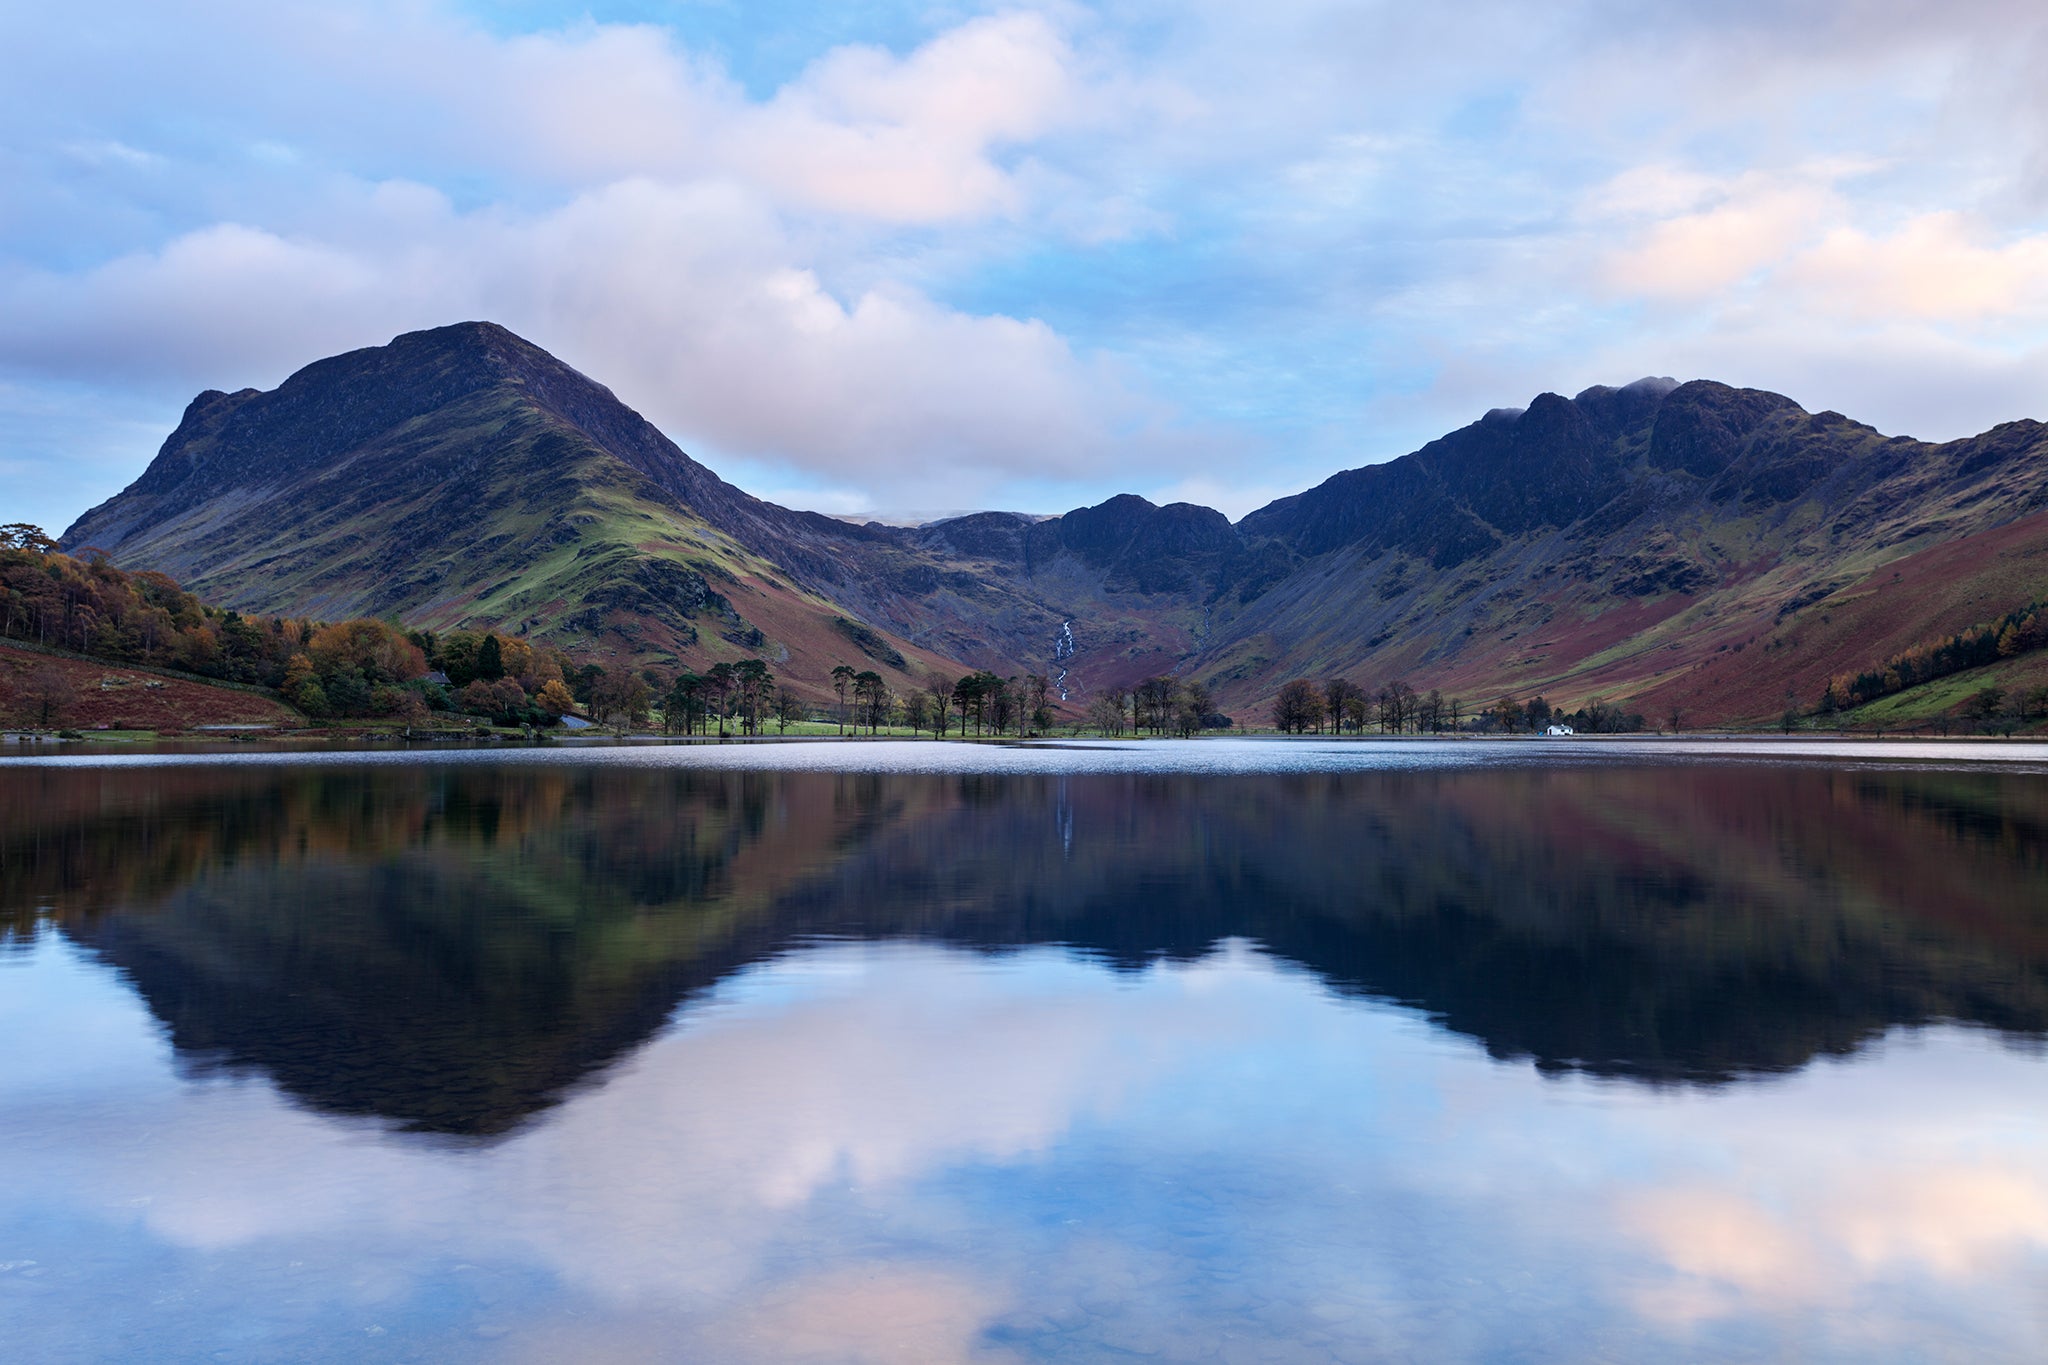 Containing sixteen lakes, 150 peaks and six national nature reserves, the Lake District National Park is the largest national park in England, comprising all of England’s mountains and covering most of the Lake District in Cumbria